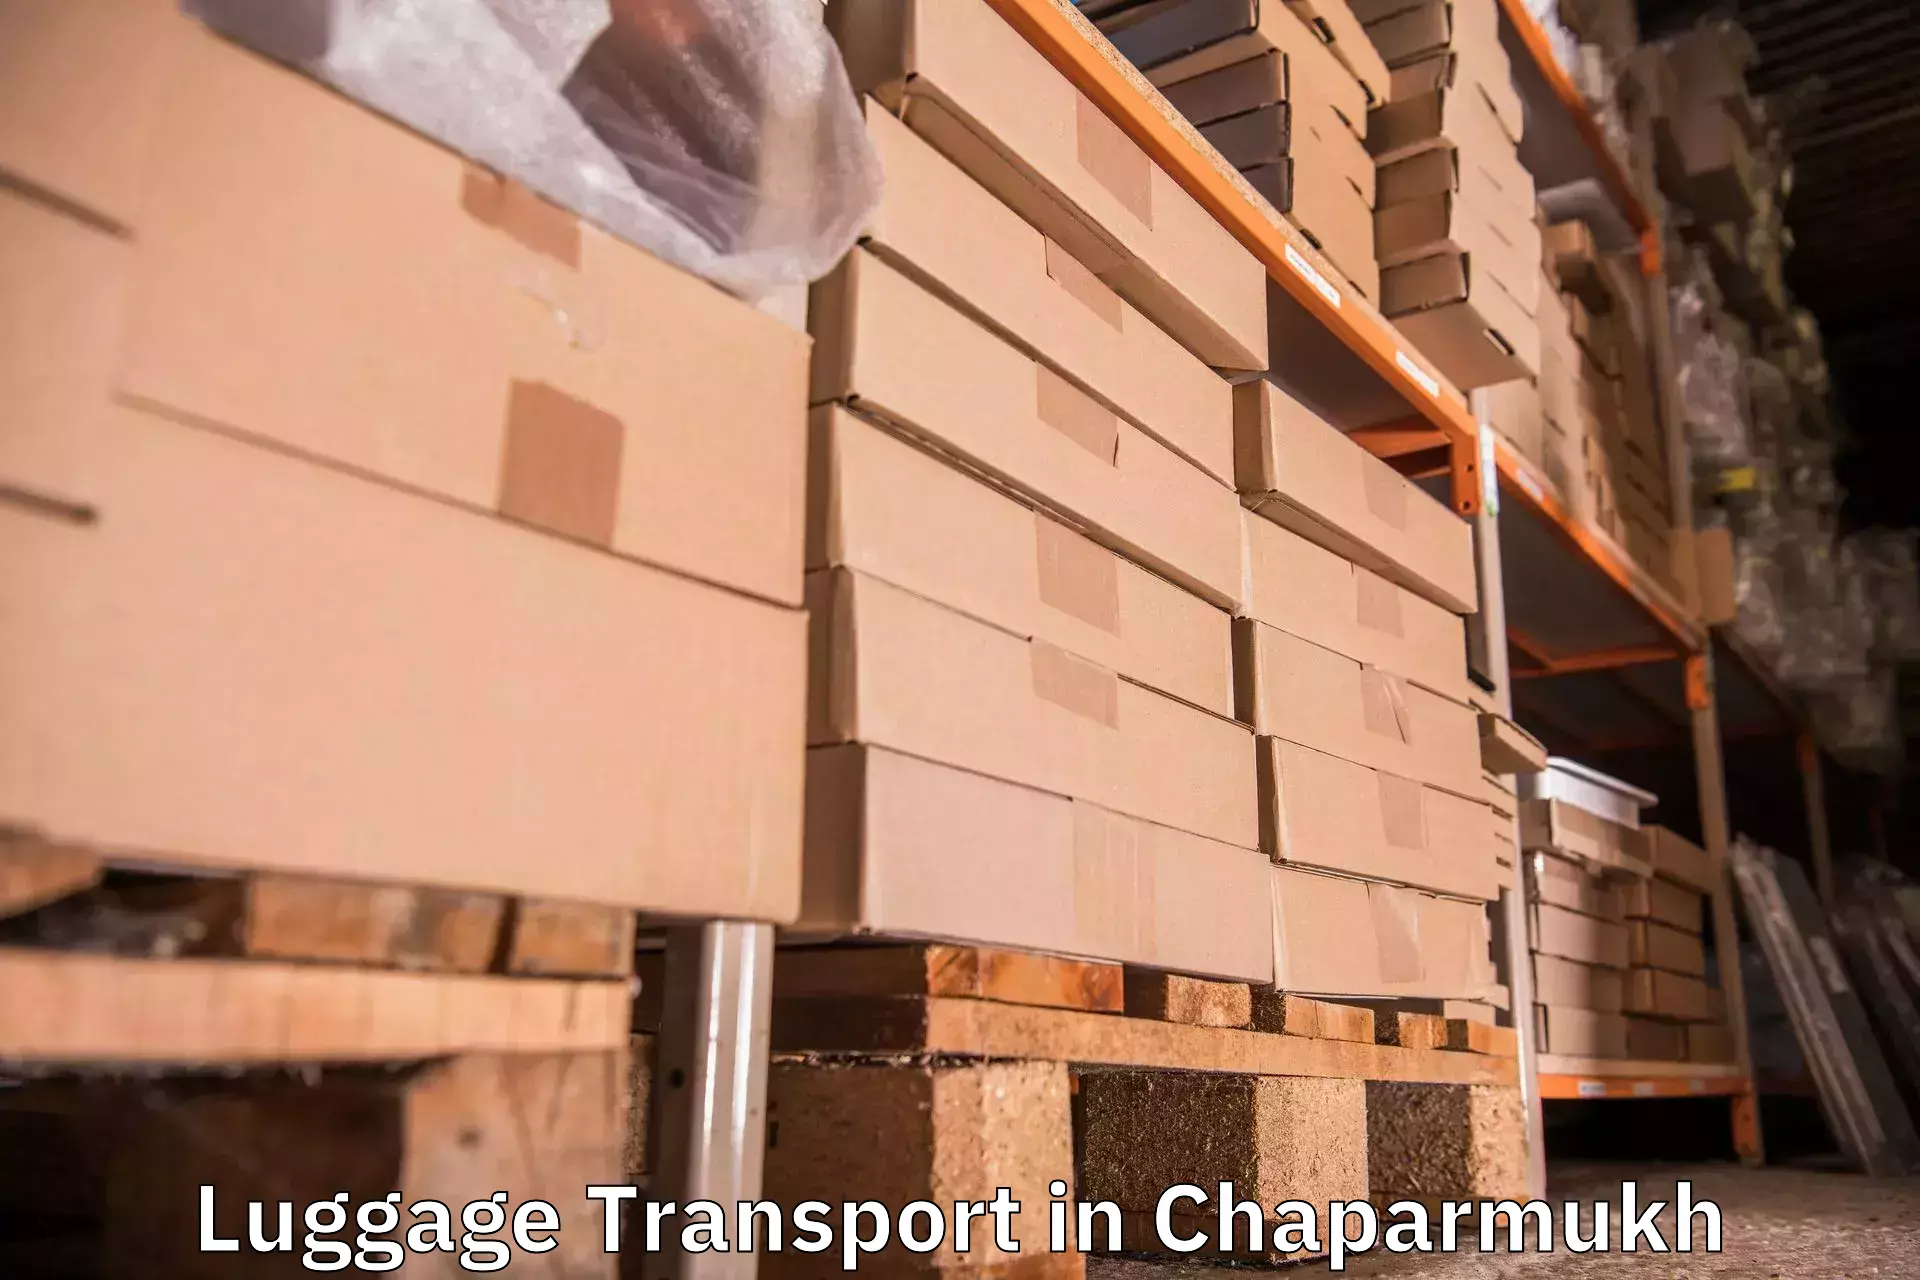 Baggage shipping experience in Chaparmukh